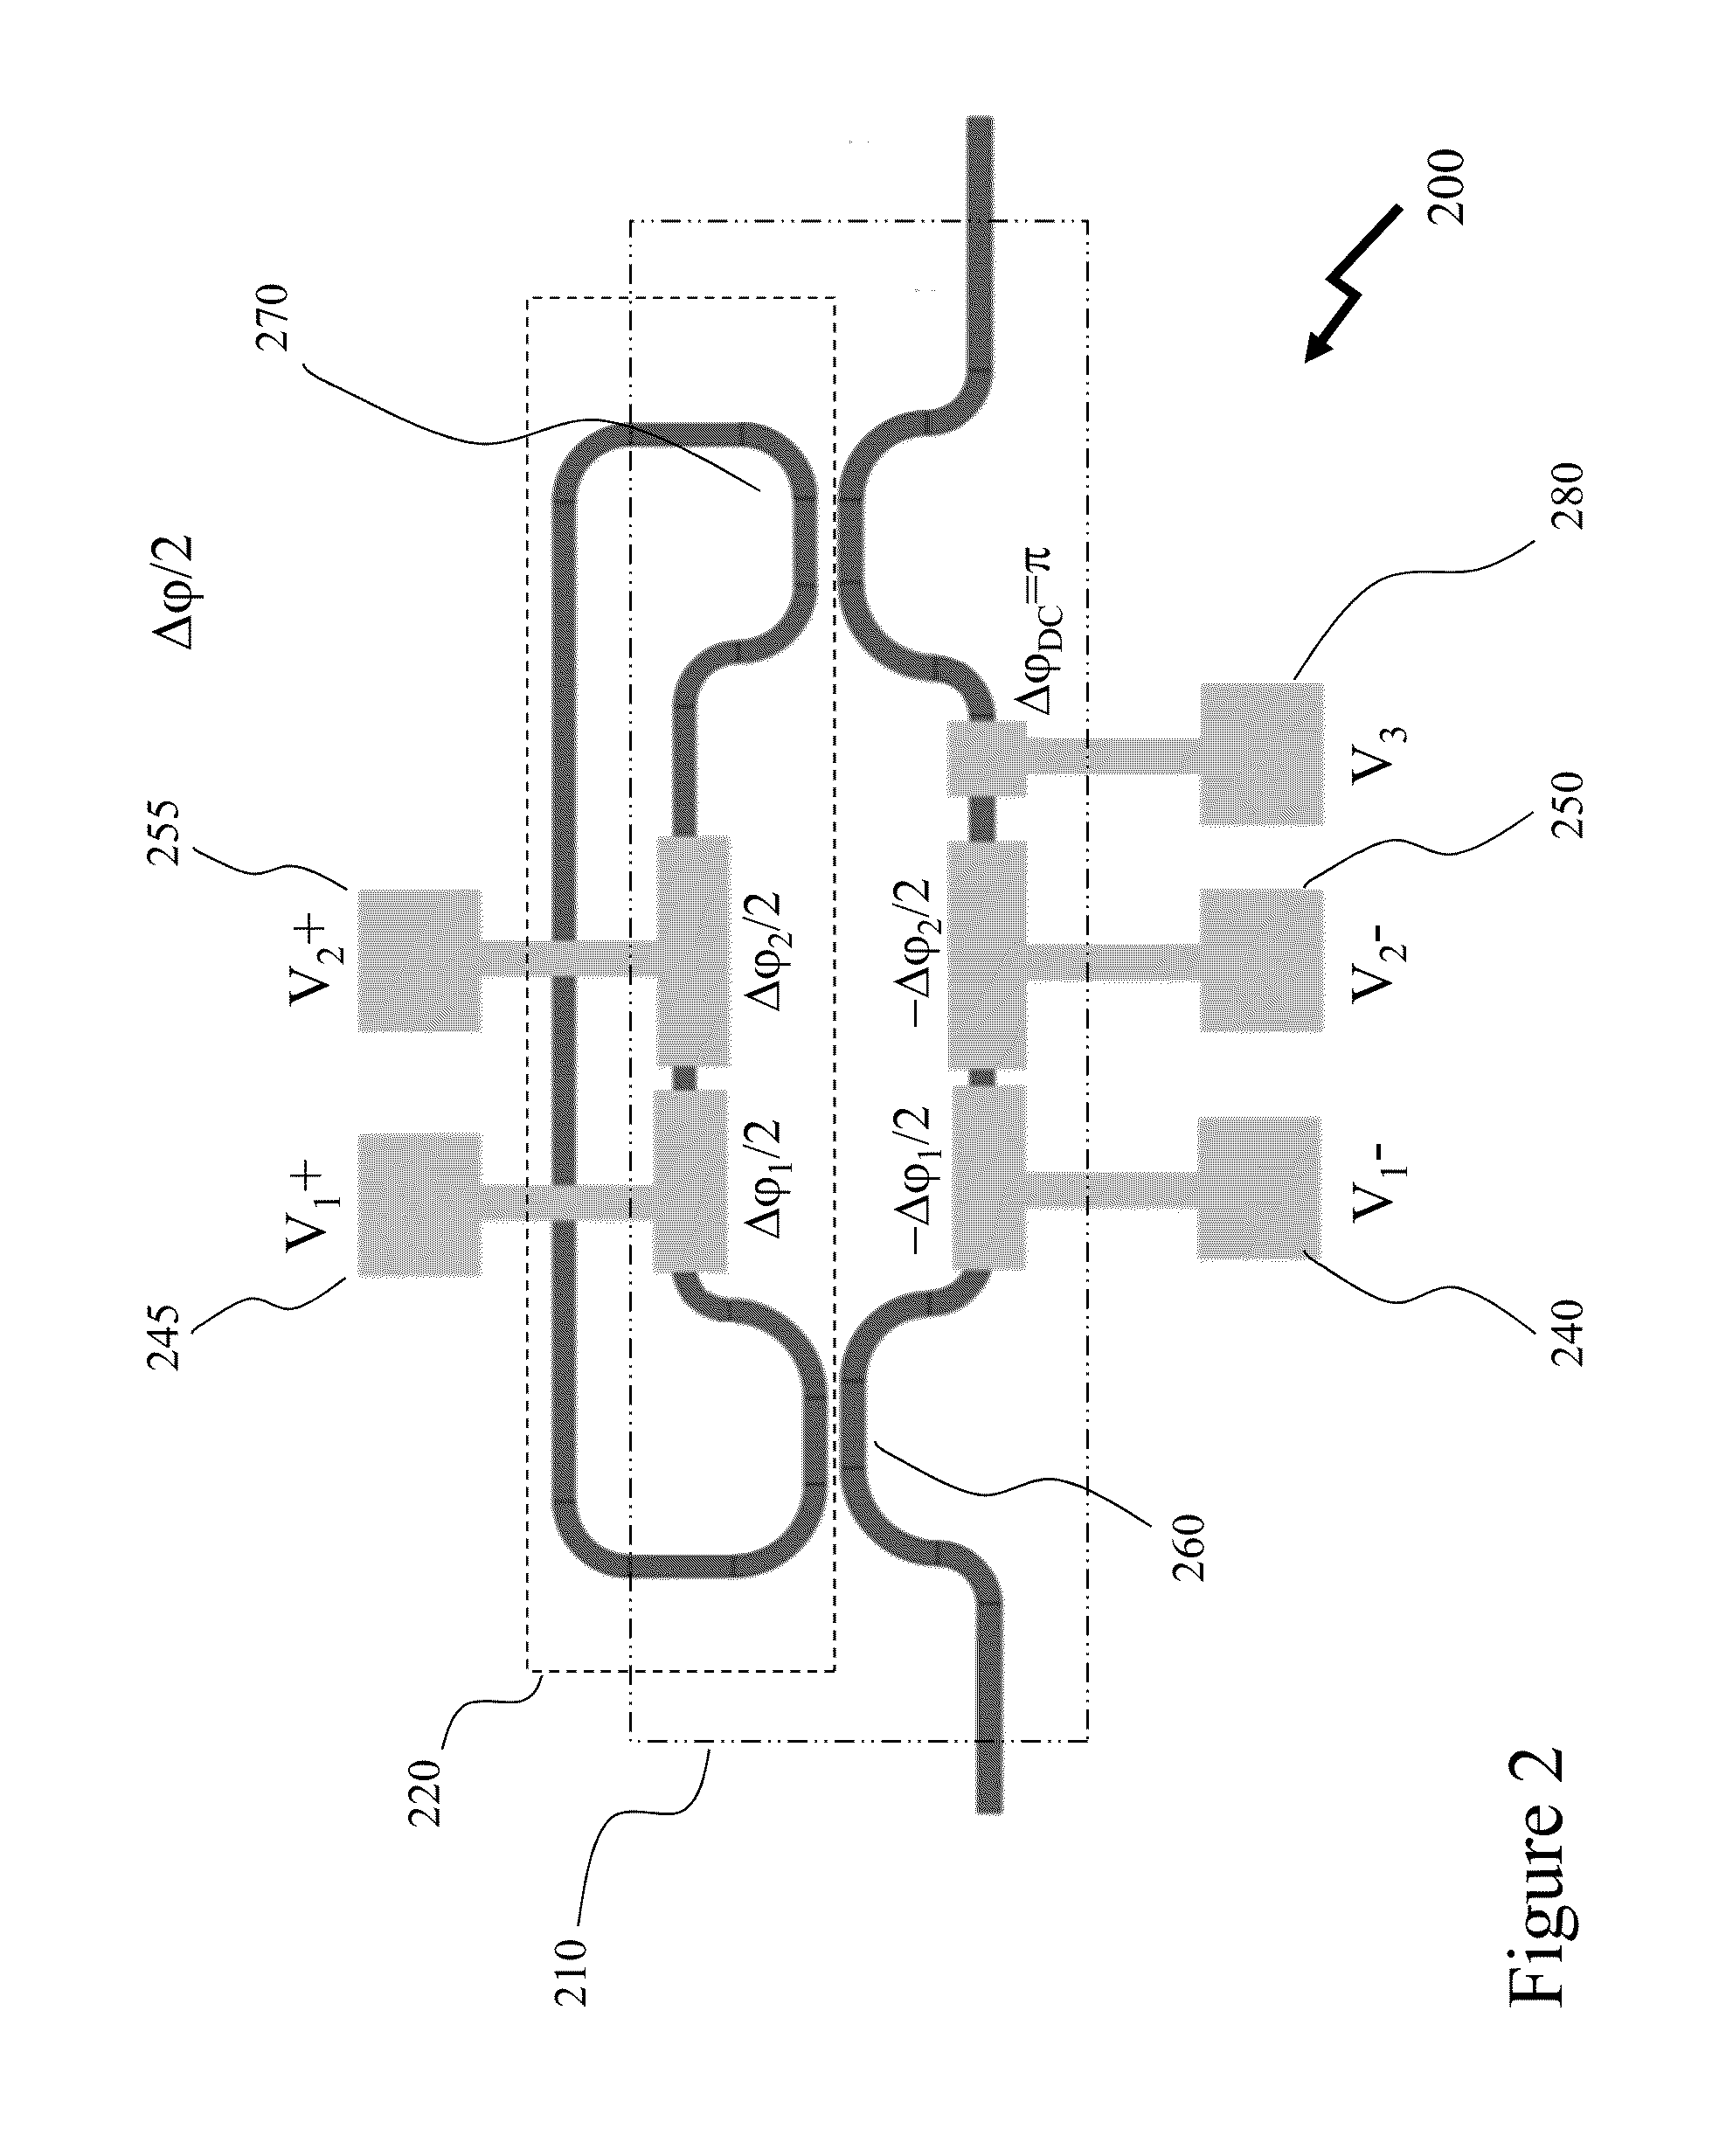 Methods and devices for photonic m-ary pulse amplitude modulation